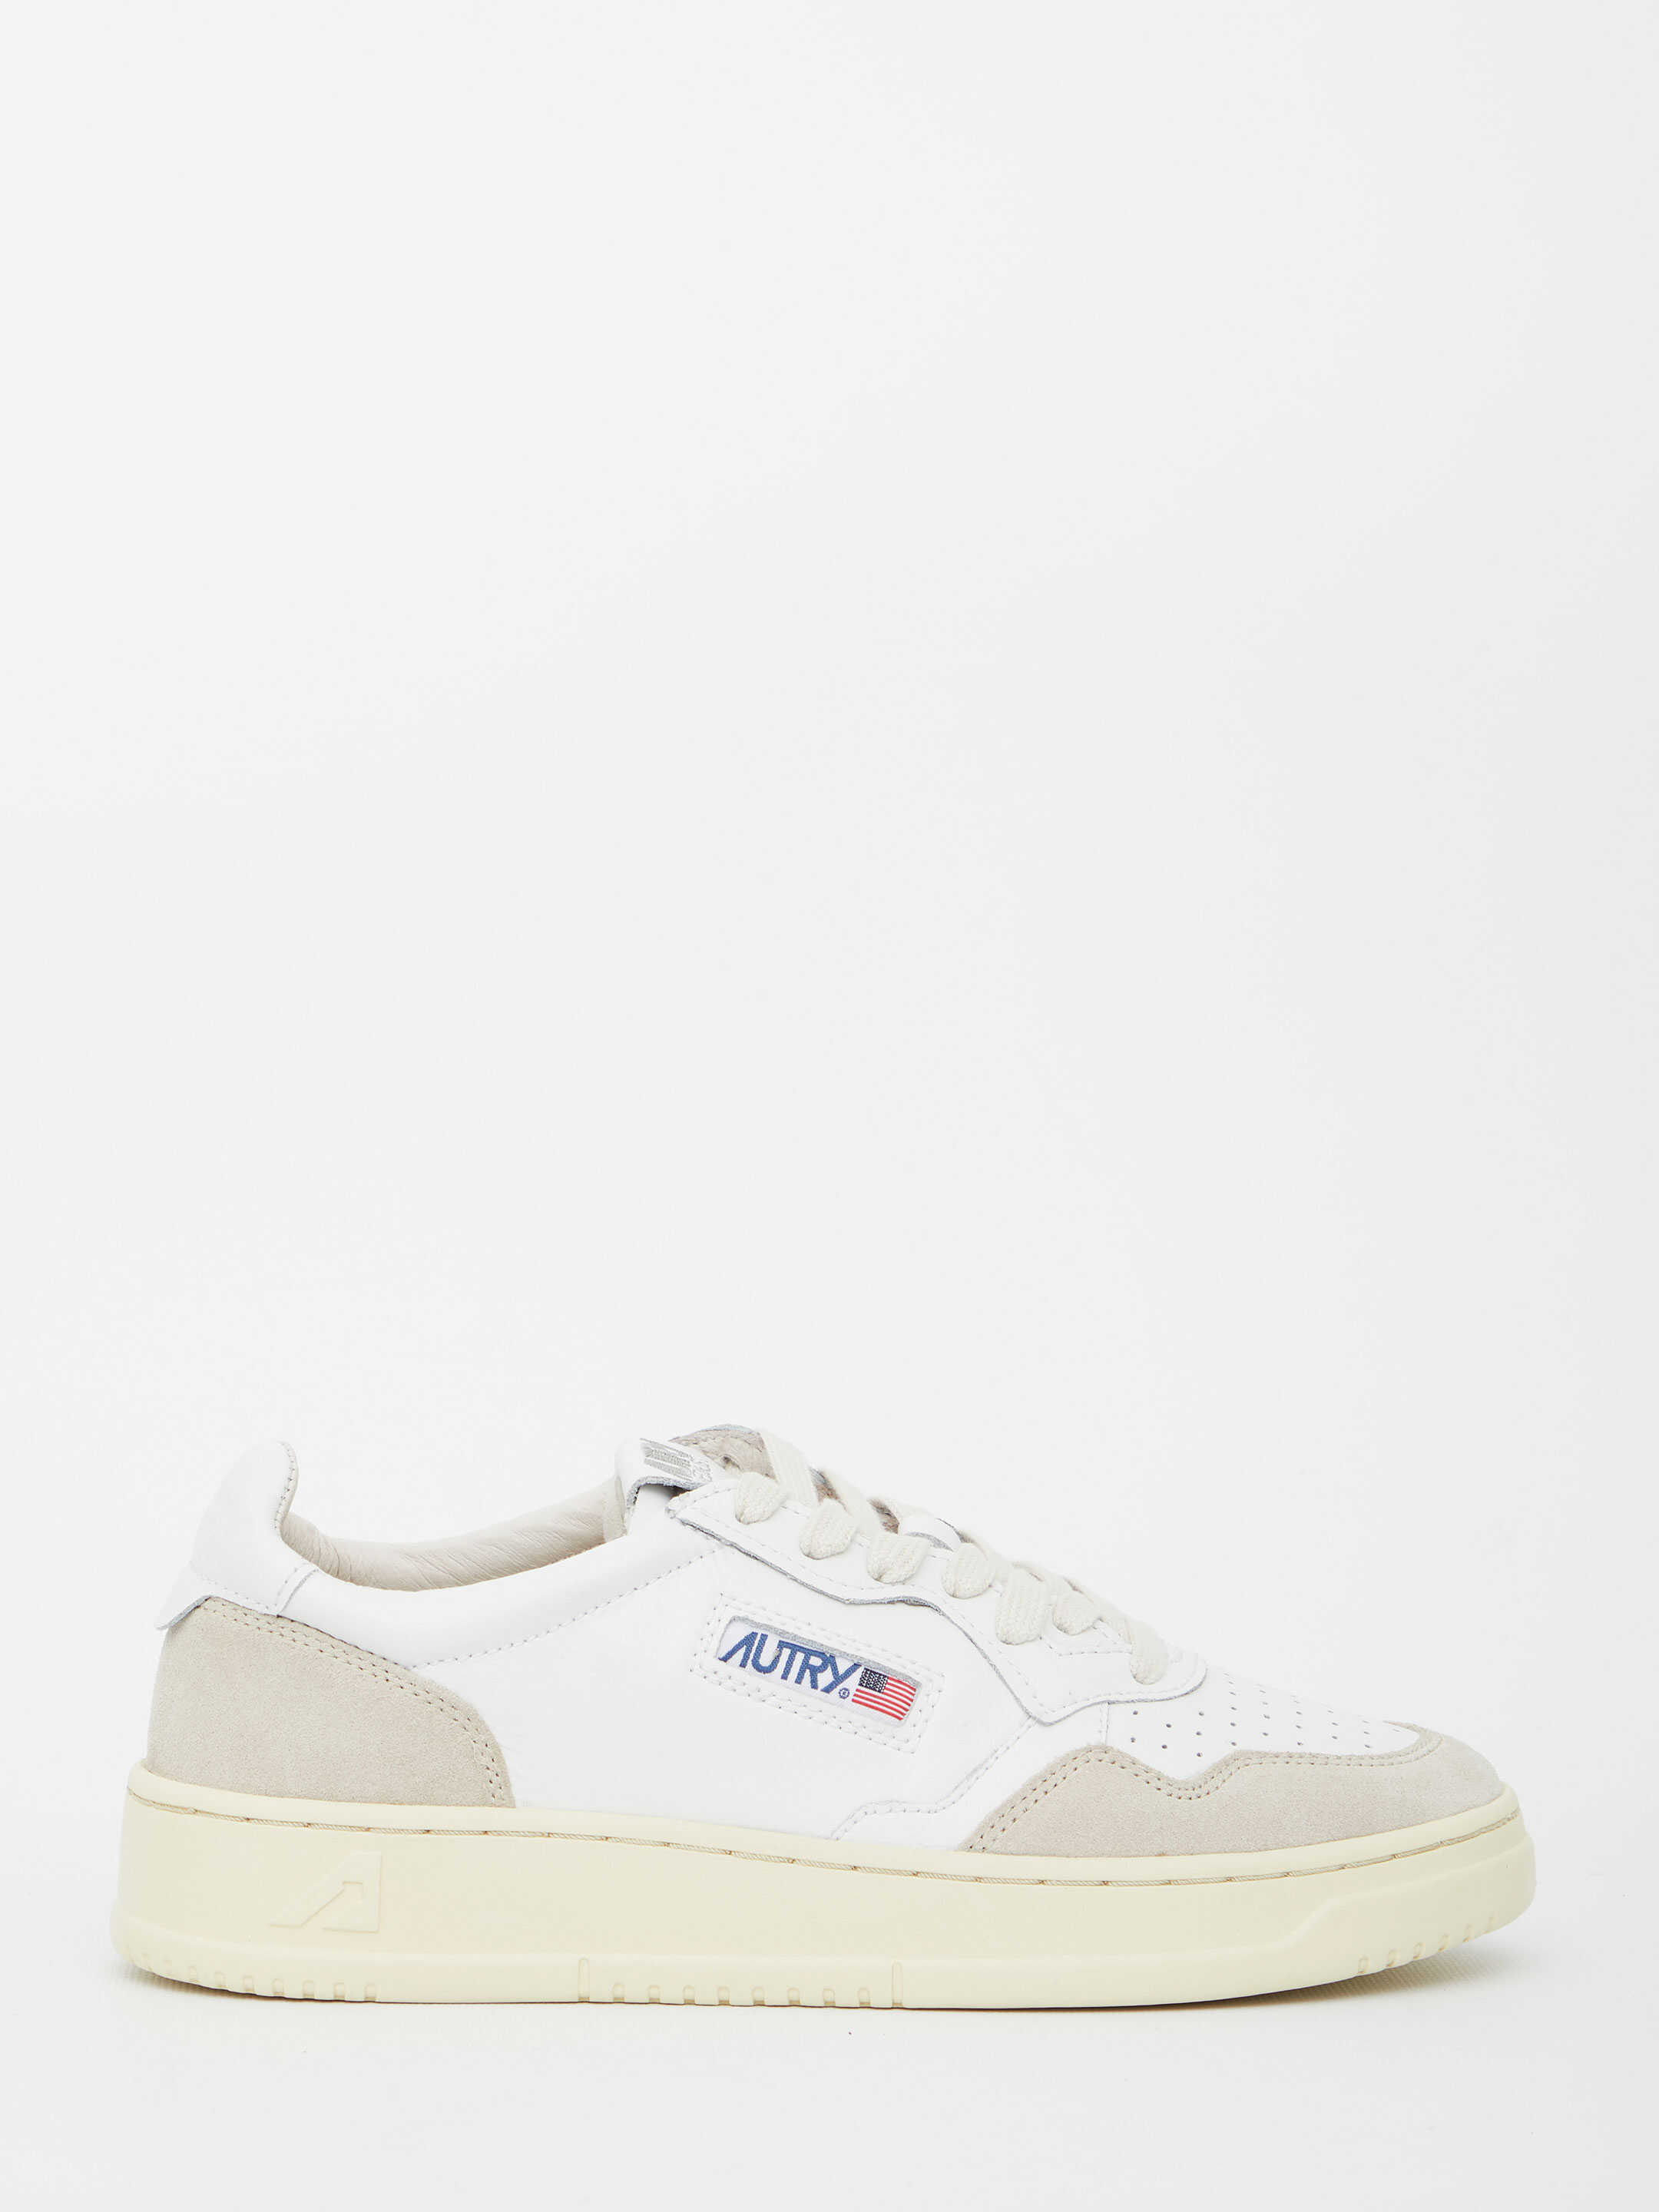 AUTRY Medalist Suede Sneakers WHITE image5